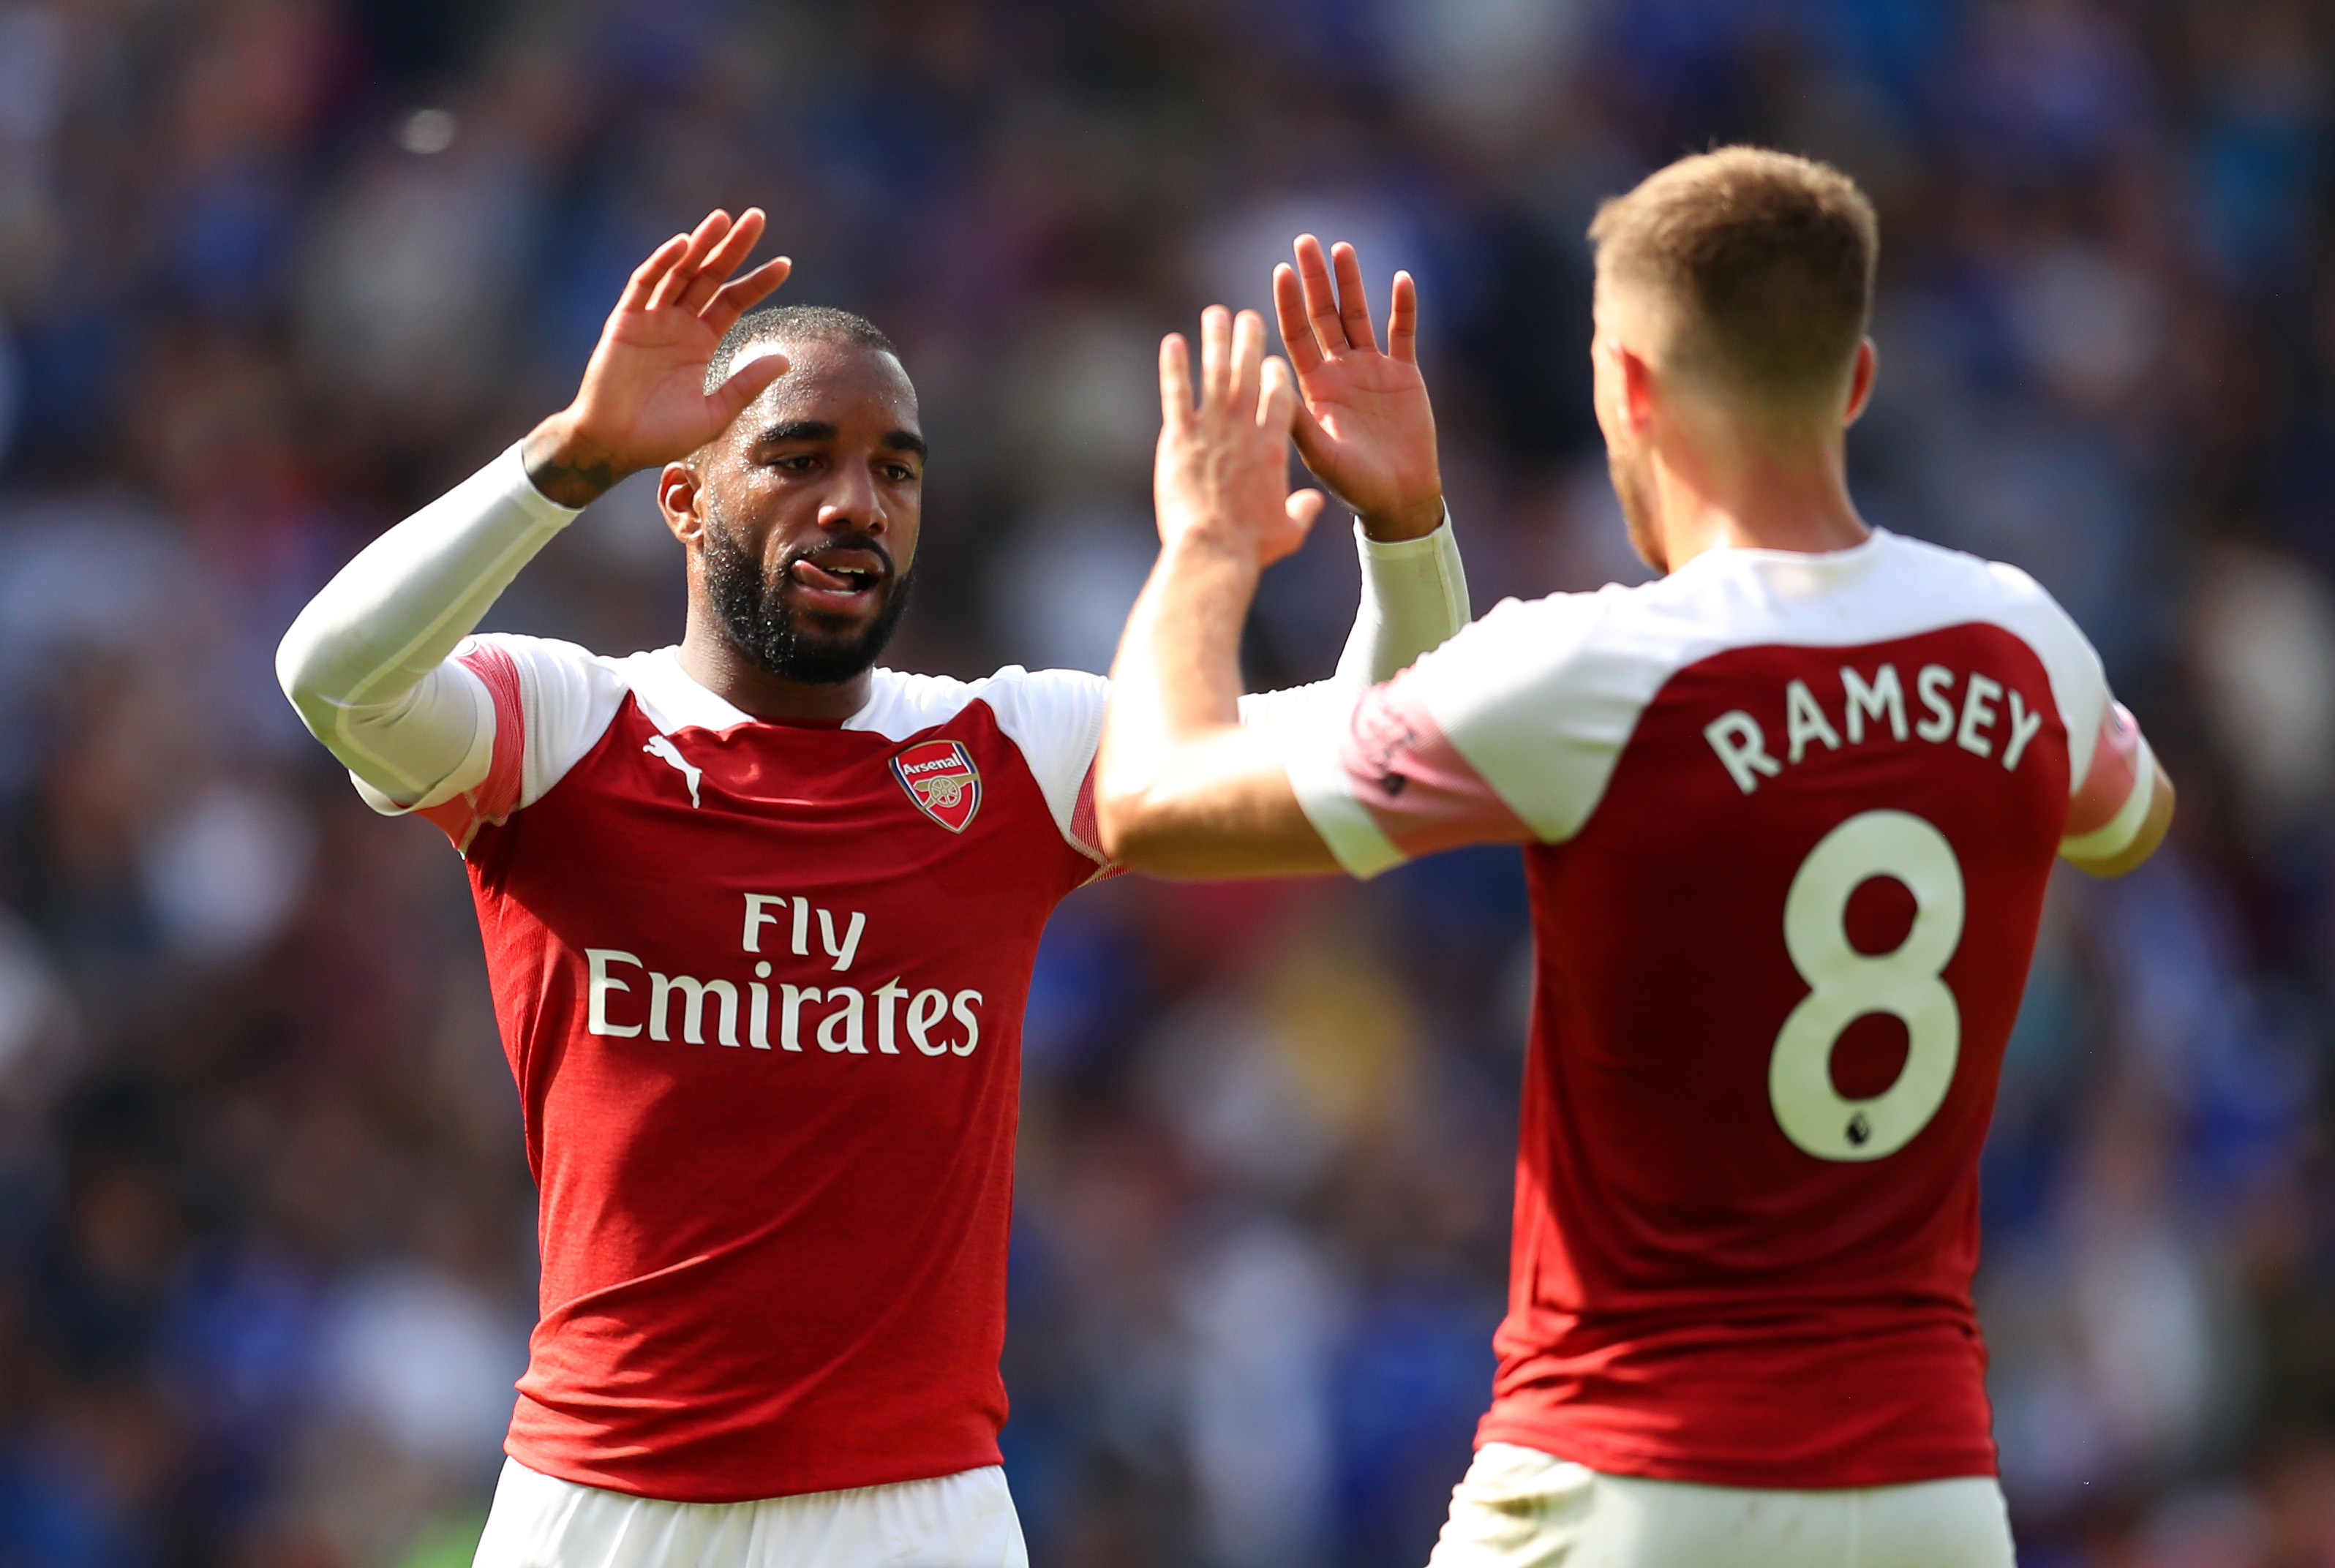 CARDIFF, WALES - SEPTEMBER 02:  Alexandre Lacazette and Aaron Ramsey of Arsenal celebrate victory after the Premier League match between Cardiff City and Arsenal FC at Cardiff City Stadium on September 2, 2018 in Cardiff, United Kingdom.  (Photo by Catherine Ivill/Getty Images)